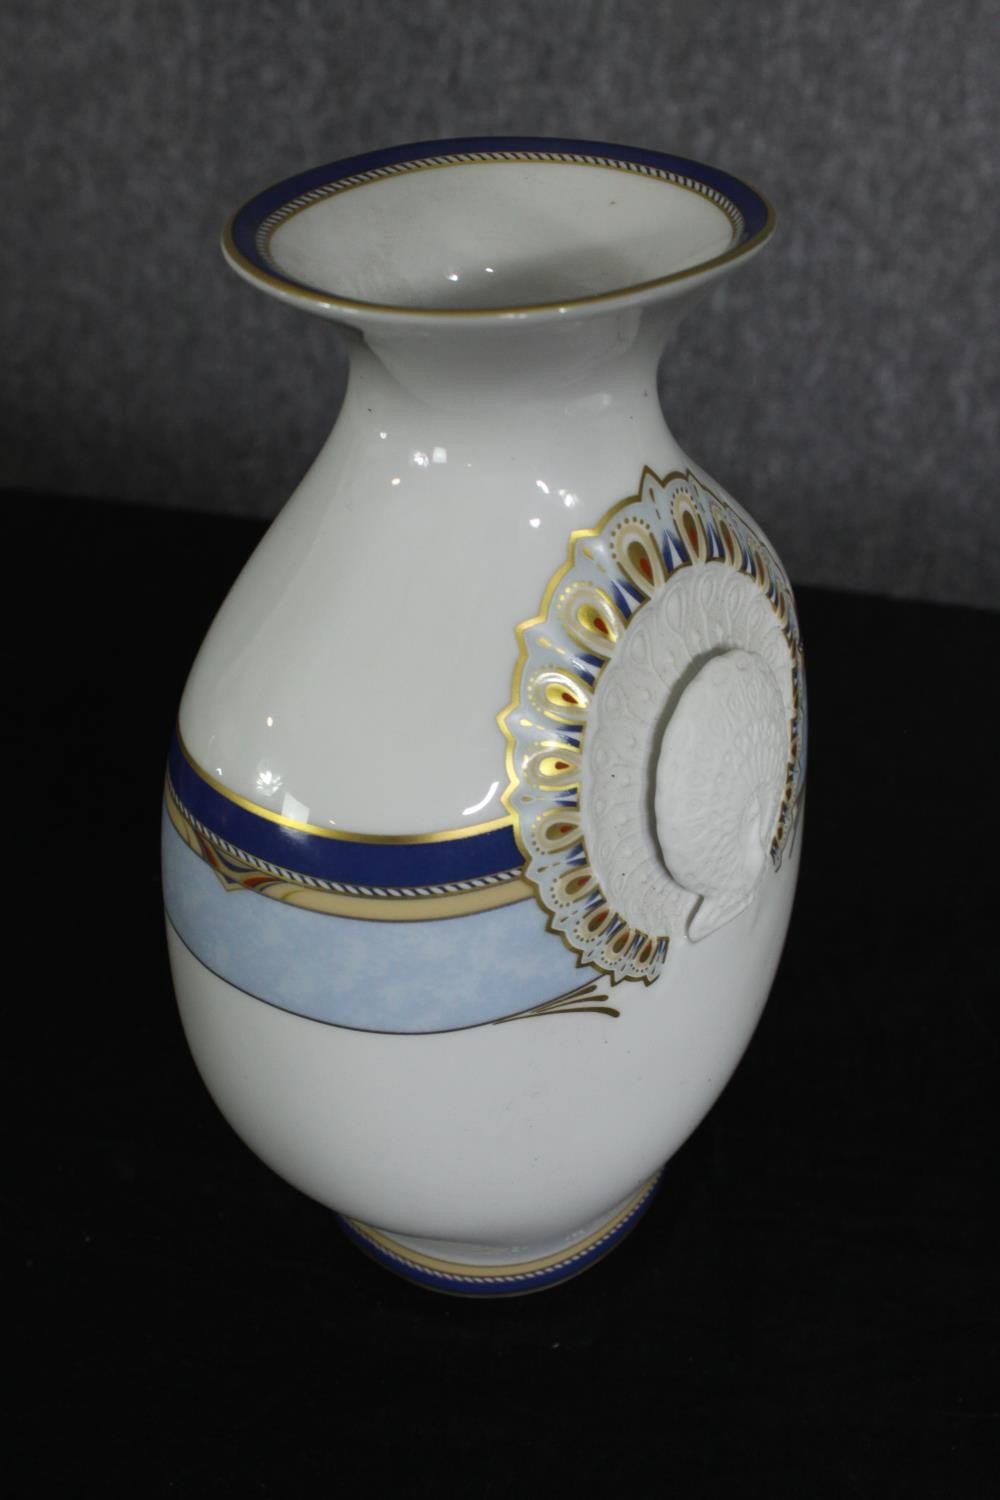 A Chinese export porcelain tobacco jar, late 19th century, a Staffordshire porcelain bowl and - Image 13 of 14